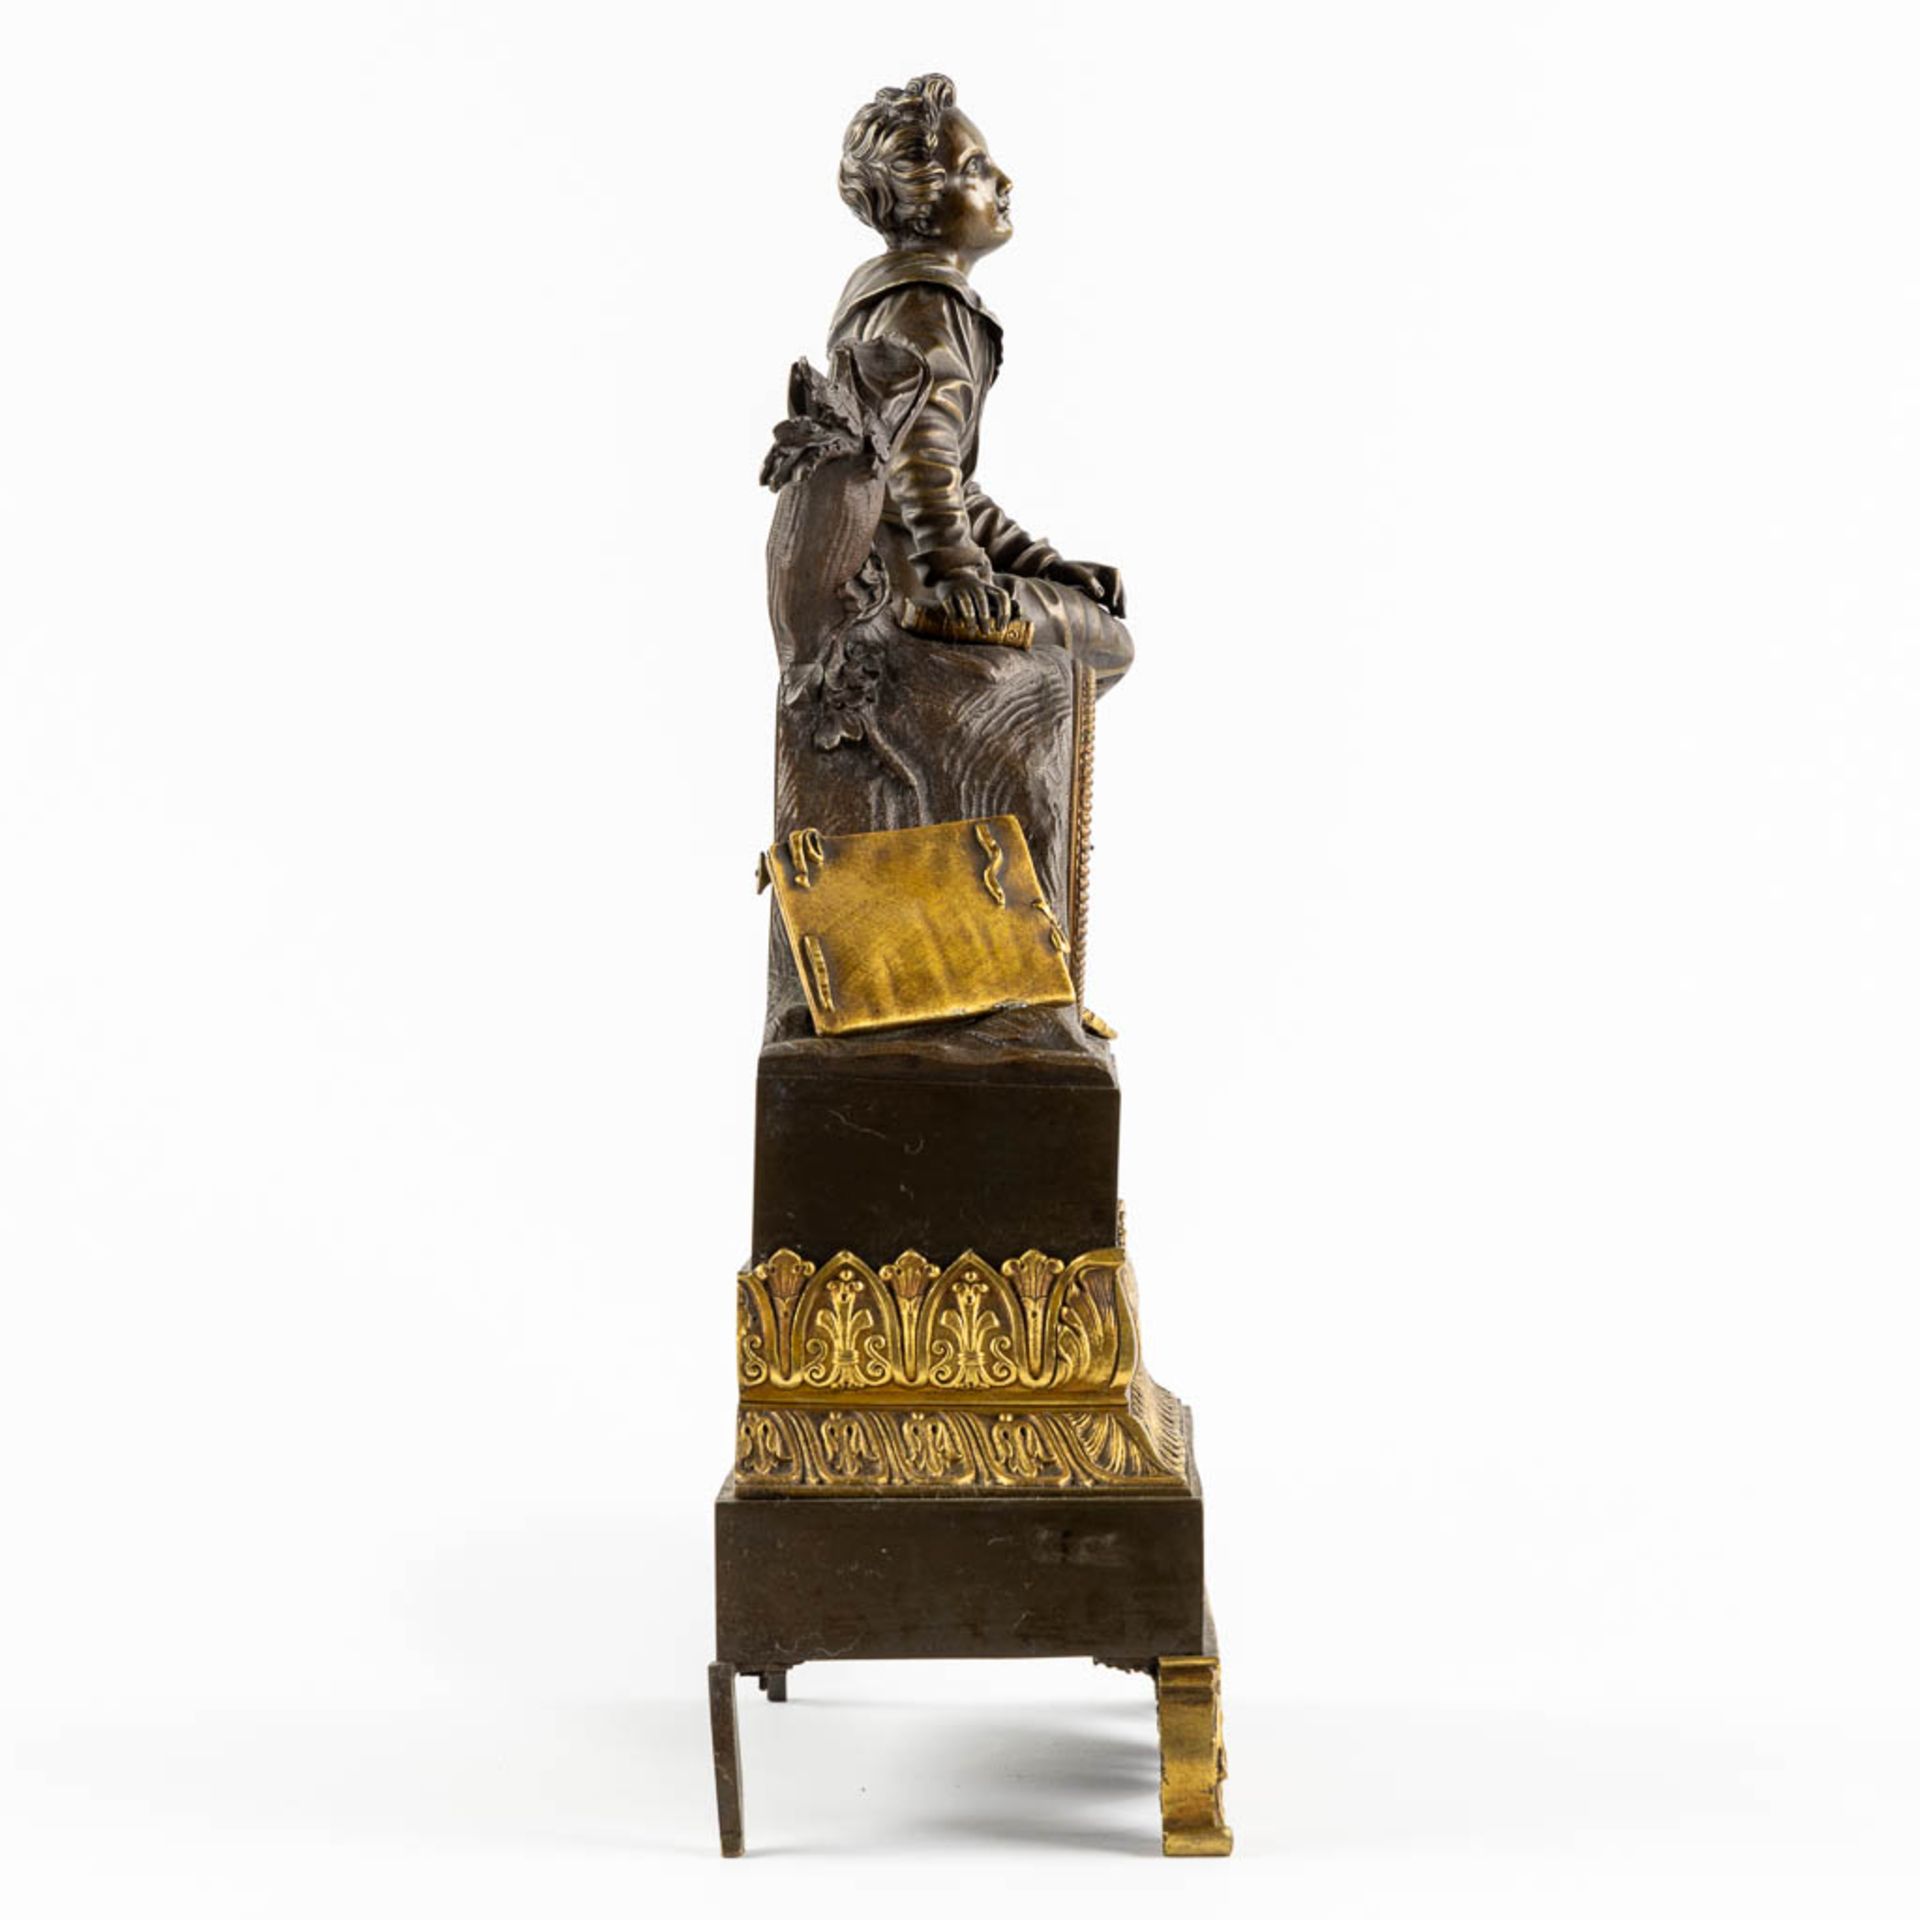 A mantle clock, gilt and patinated bronze, Empire style. 19th C. (L:13 x W:34 x H:46 cm) - Image 4 of 9